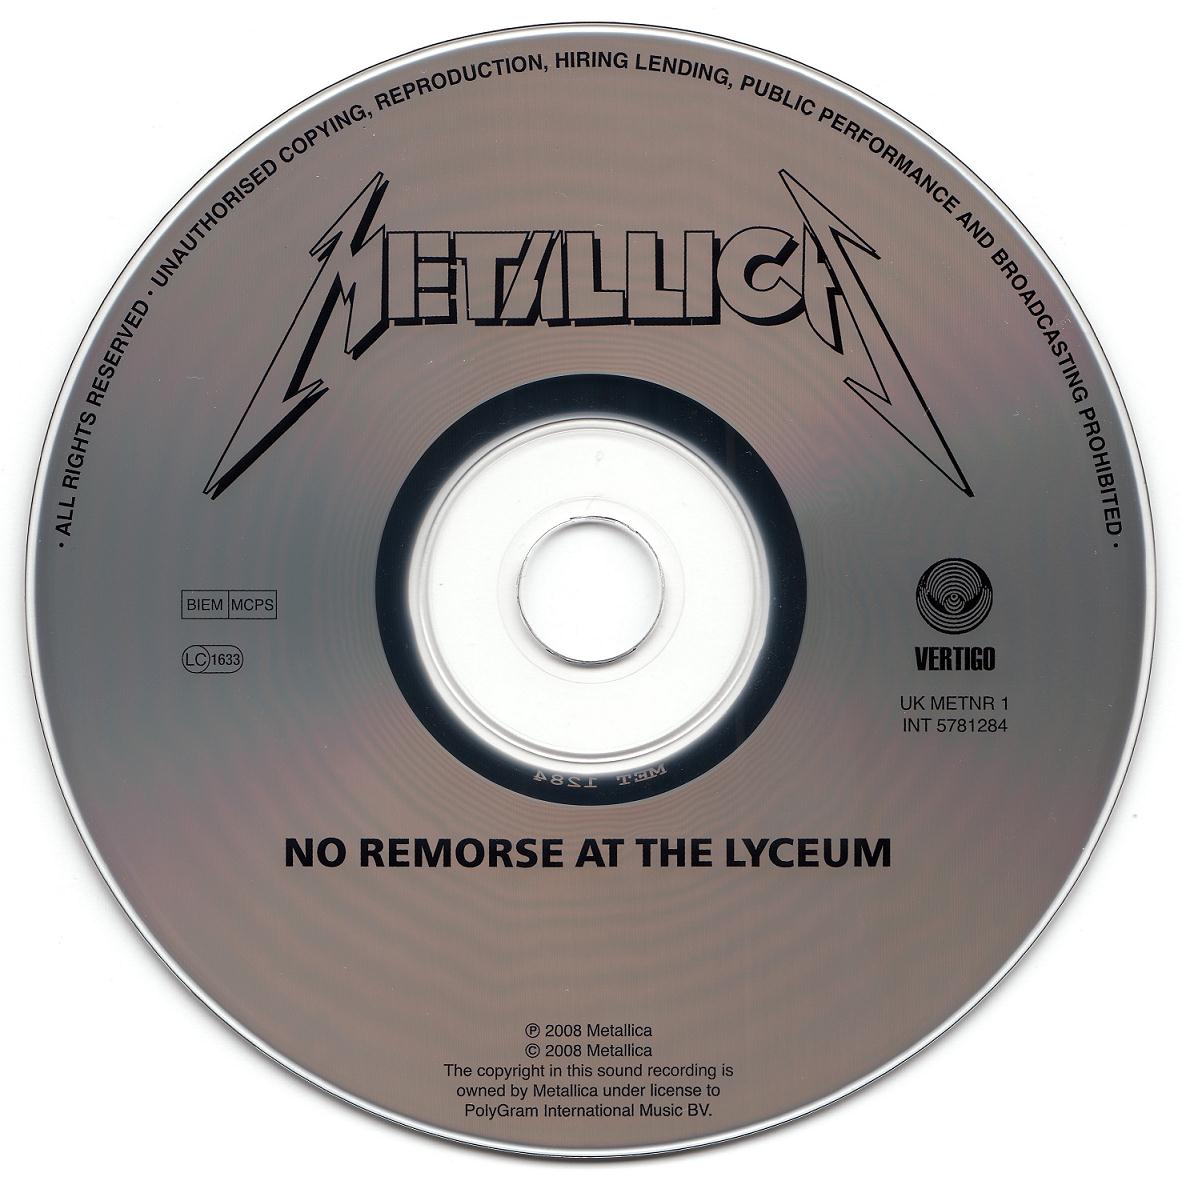 1984-11-12-NO_REMORSE_AT_THE_LYCEUM-CD